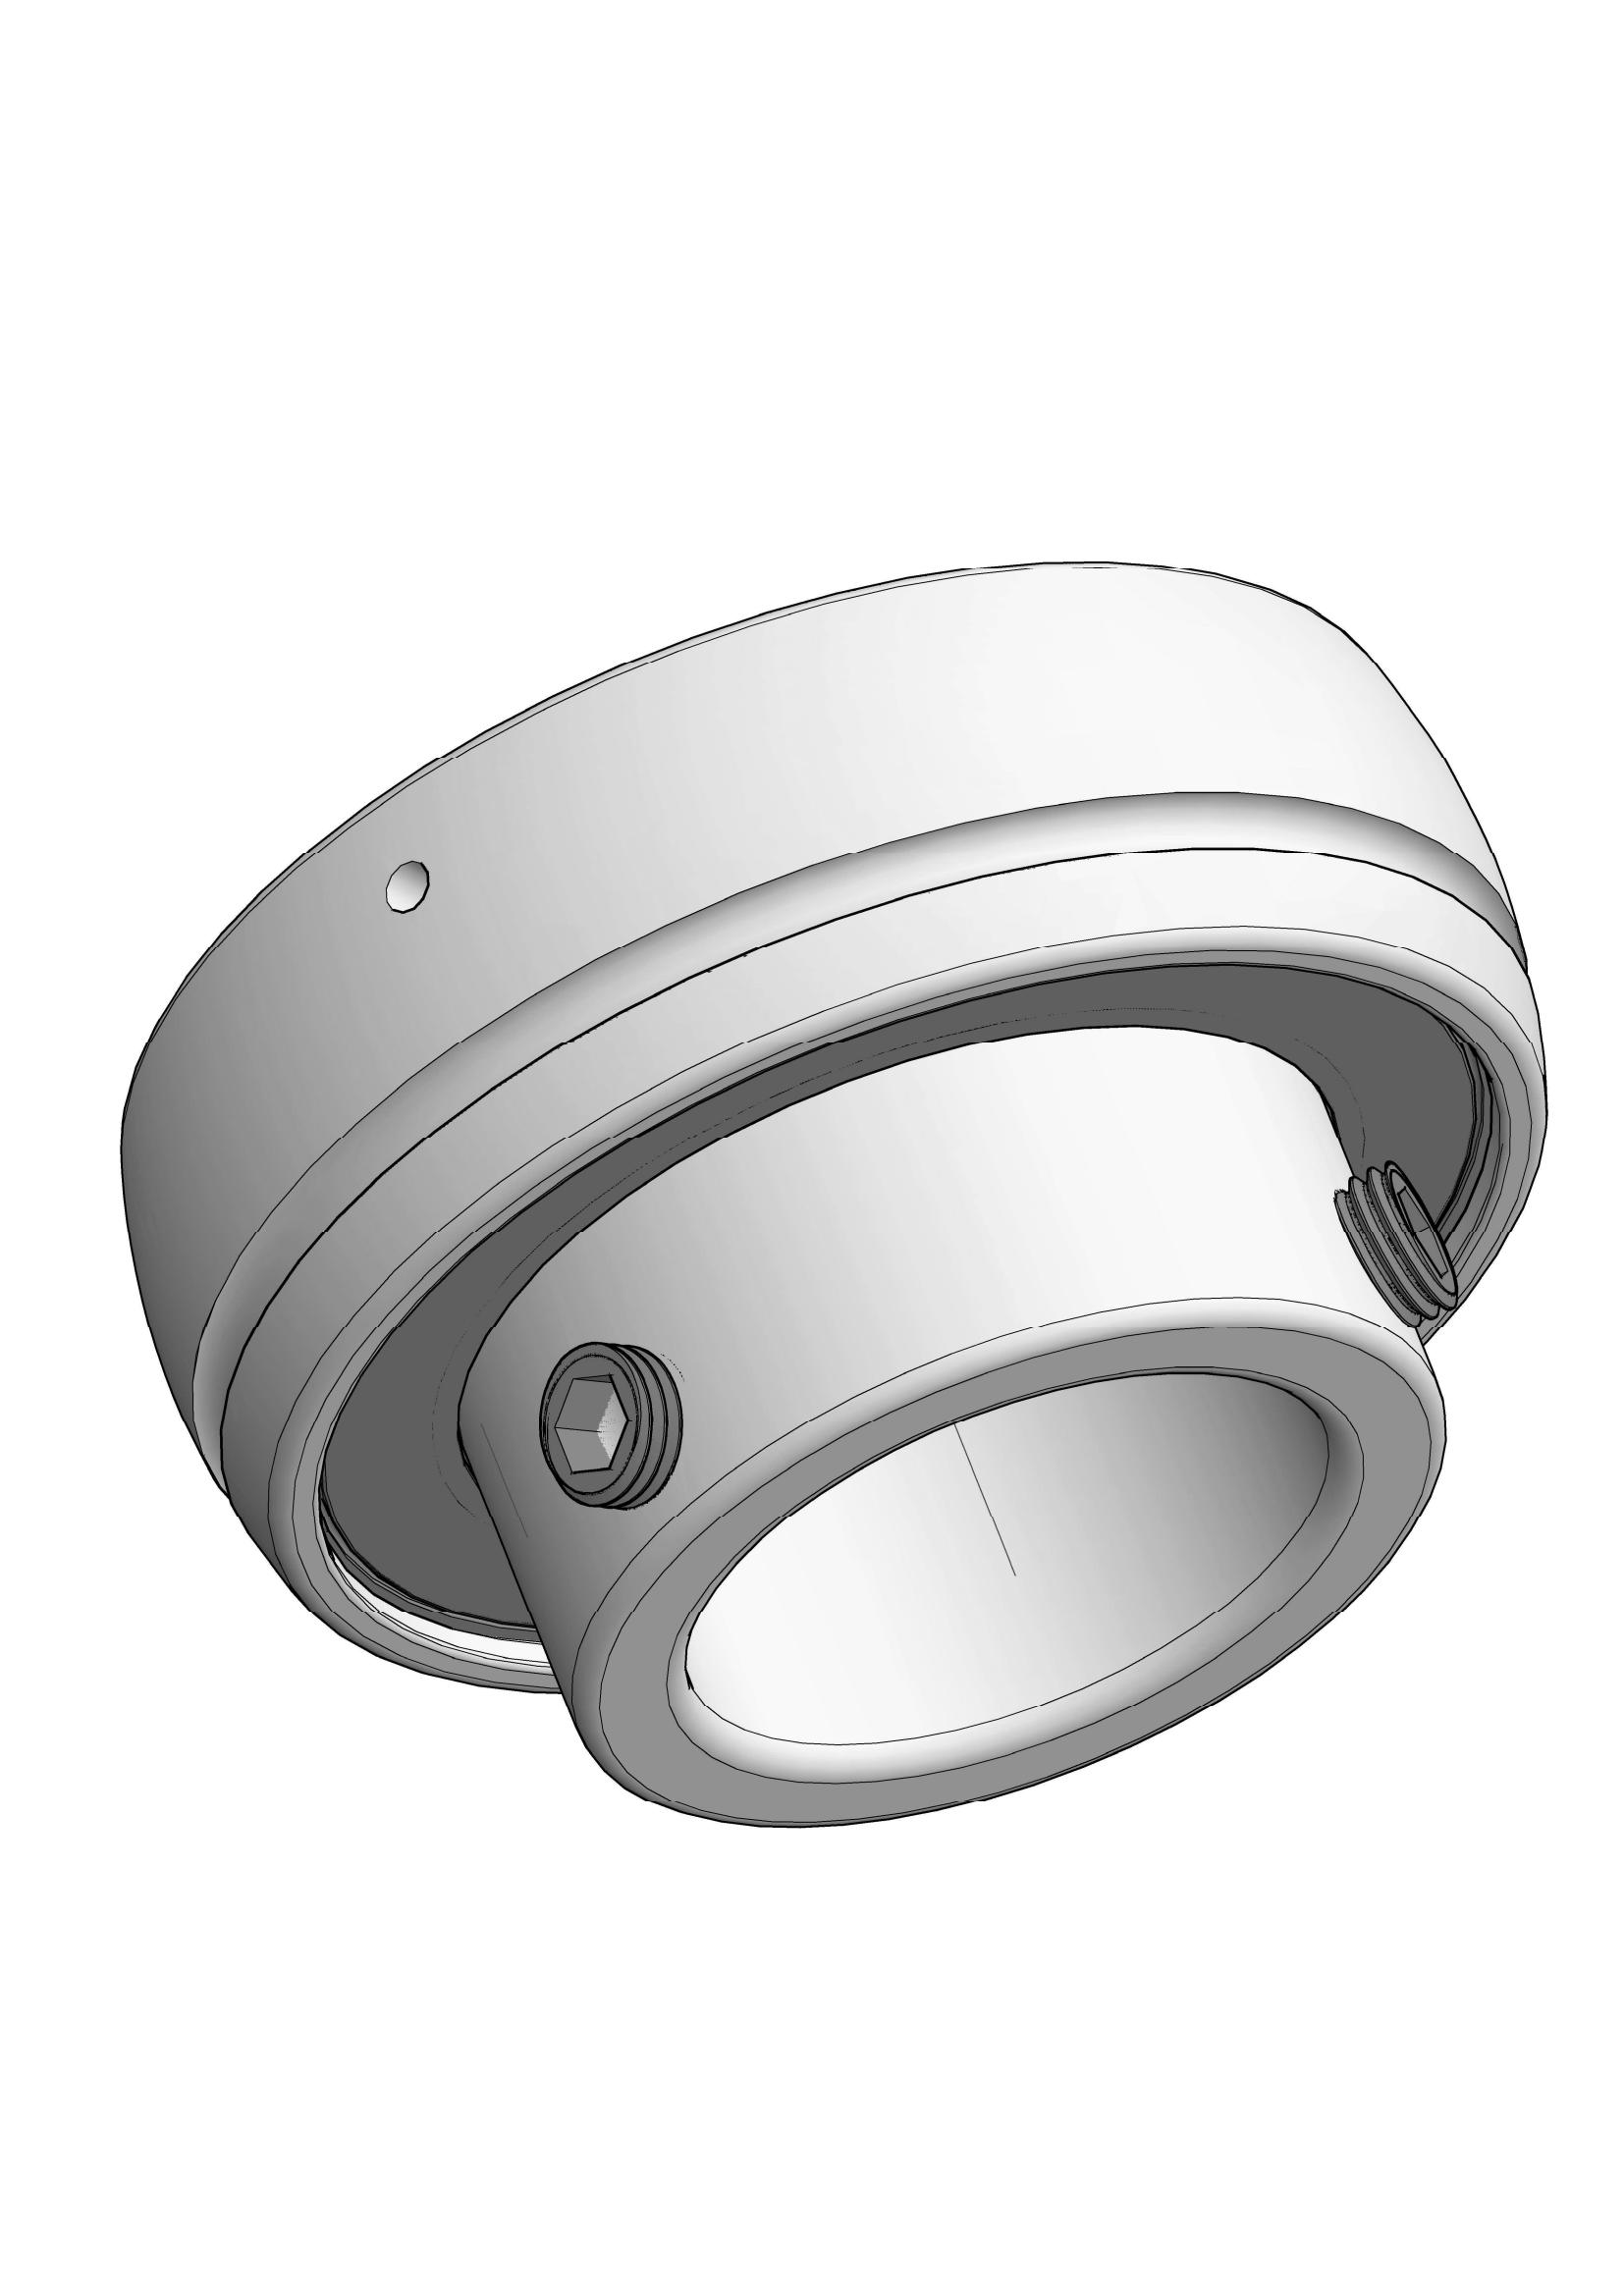 SB205-13 insert ball bearings with Eccentric Collar Lock with 13/16 inch Bore